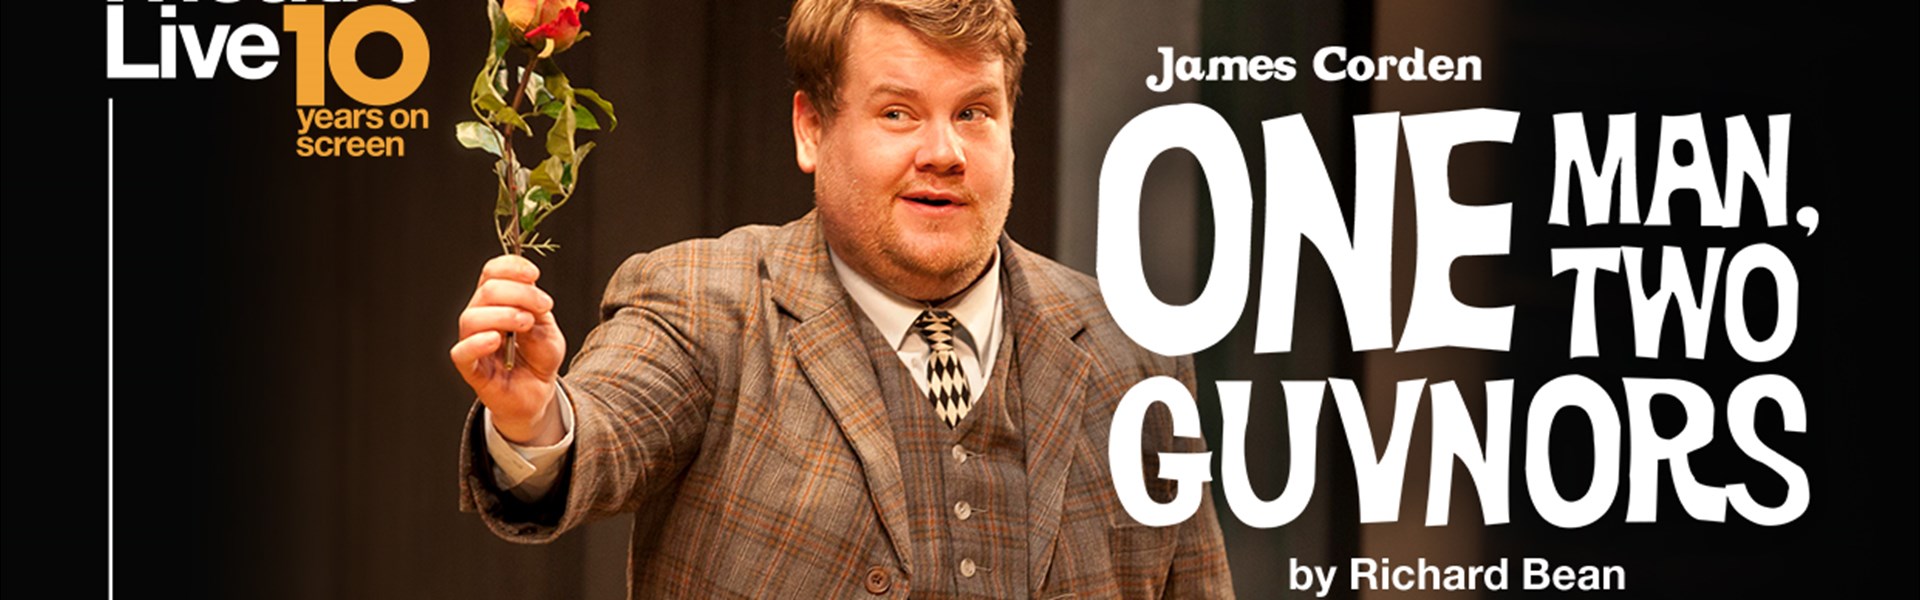 One Man Two Guvnors (Live Recording)